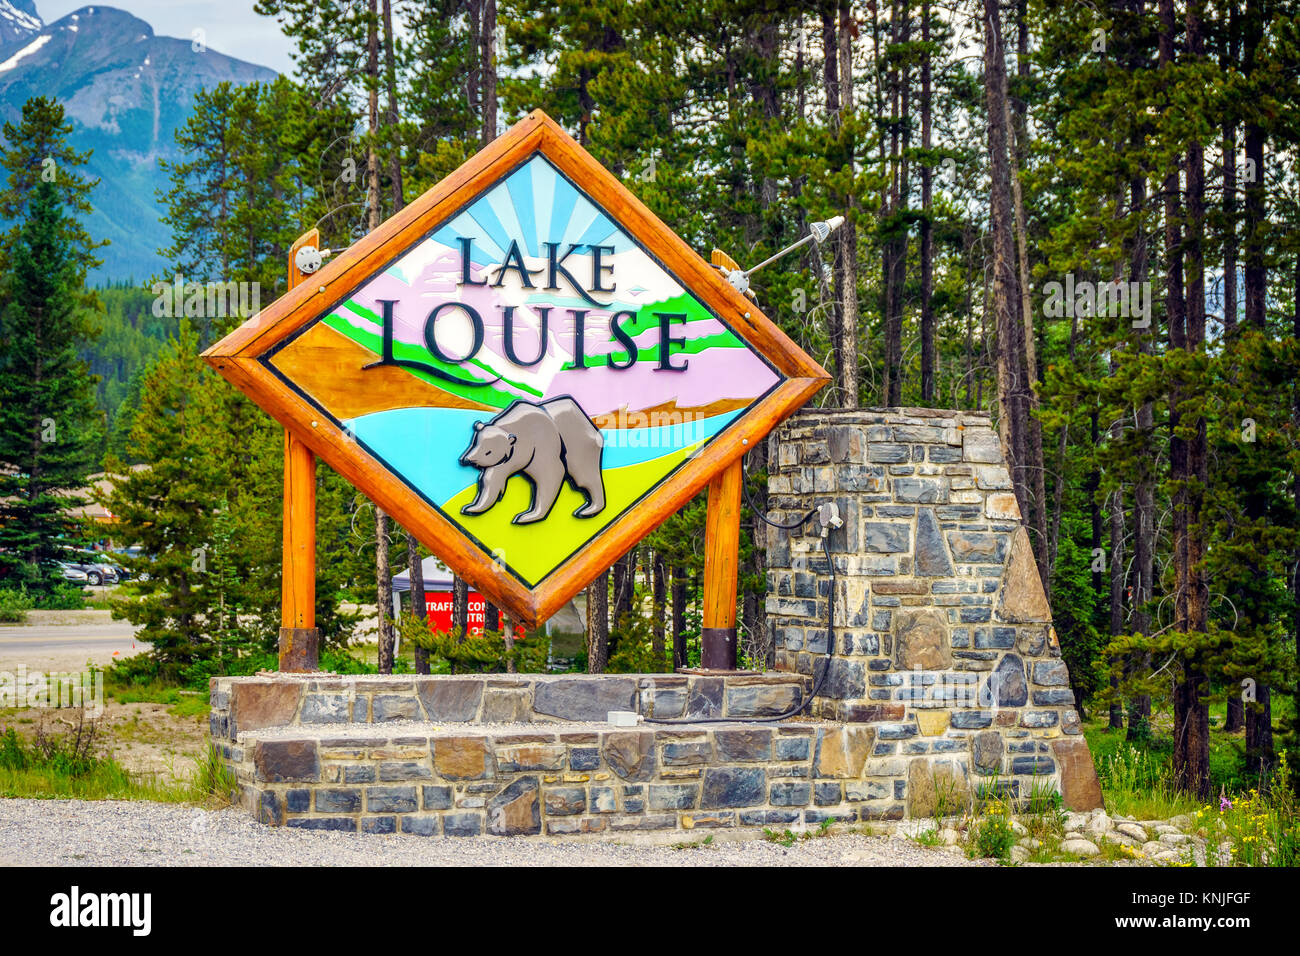 Welcome to Lake Louise, welcoming sign to the famous town, Alberta, Canada Stock Photo